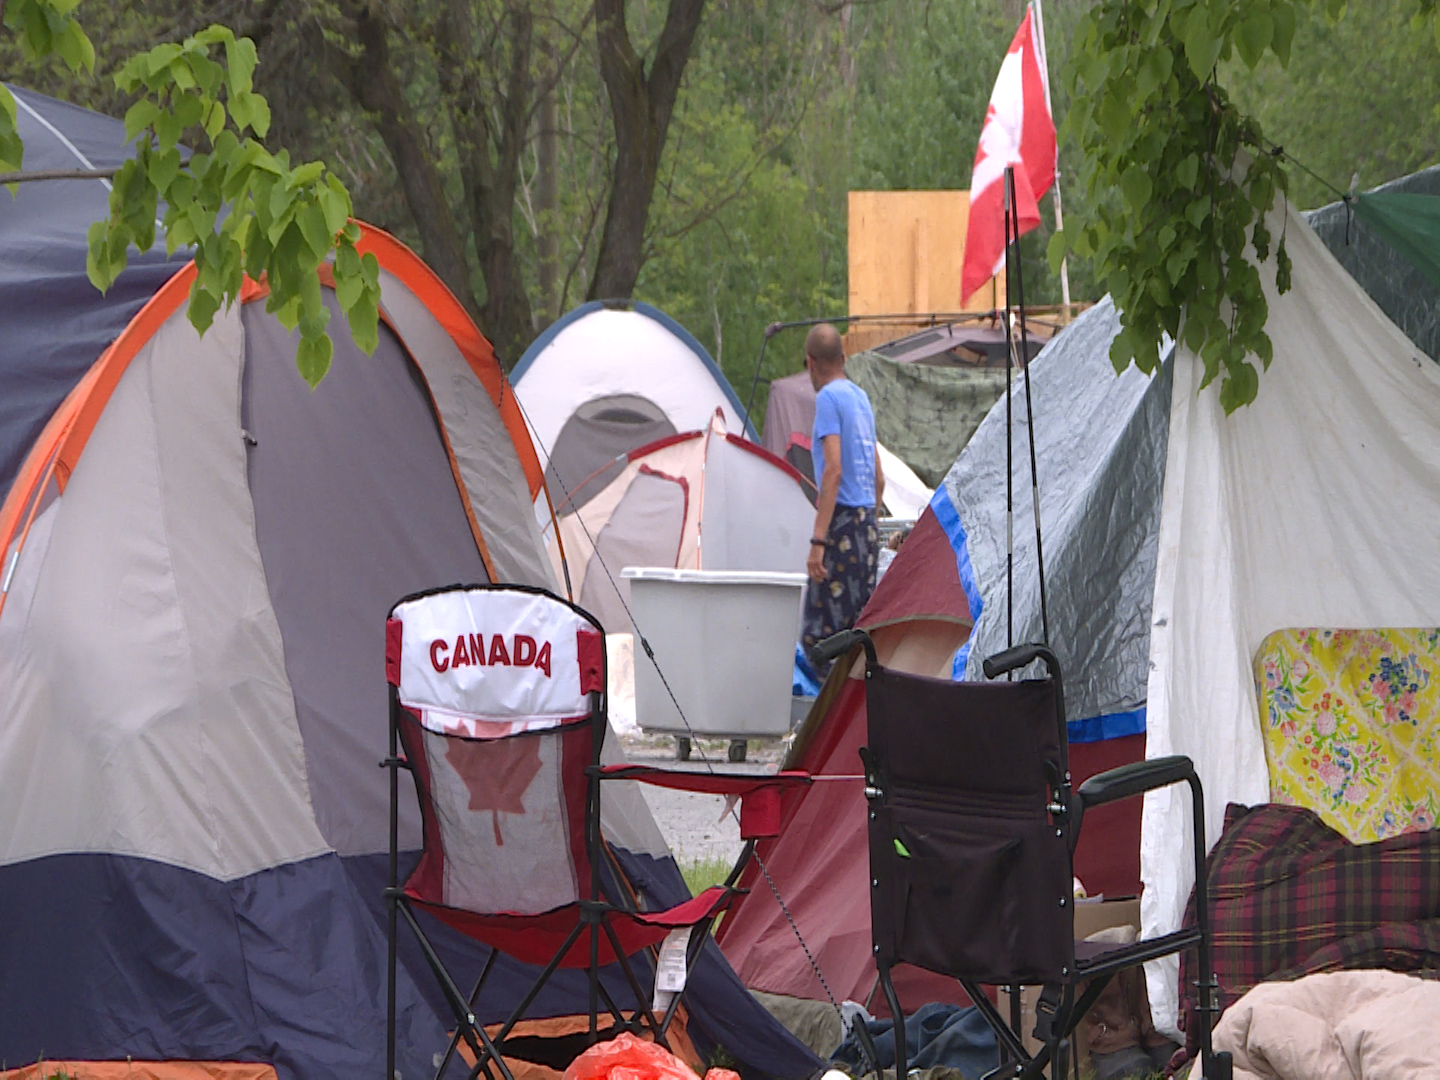 ‘Threat to life’ leads to tent removal at Belle Park in Kingston